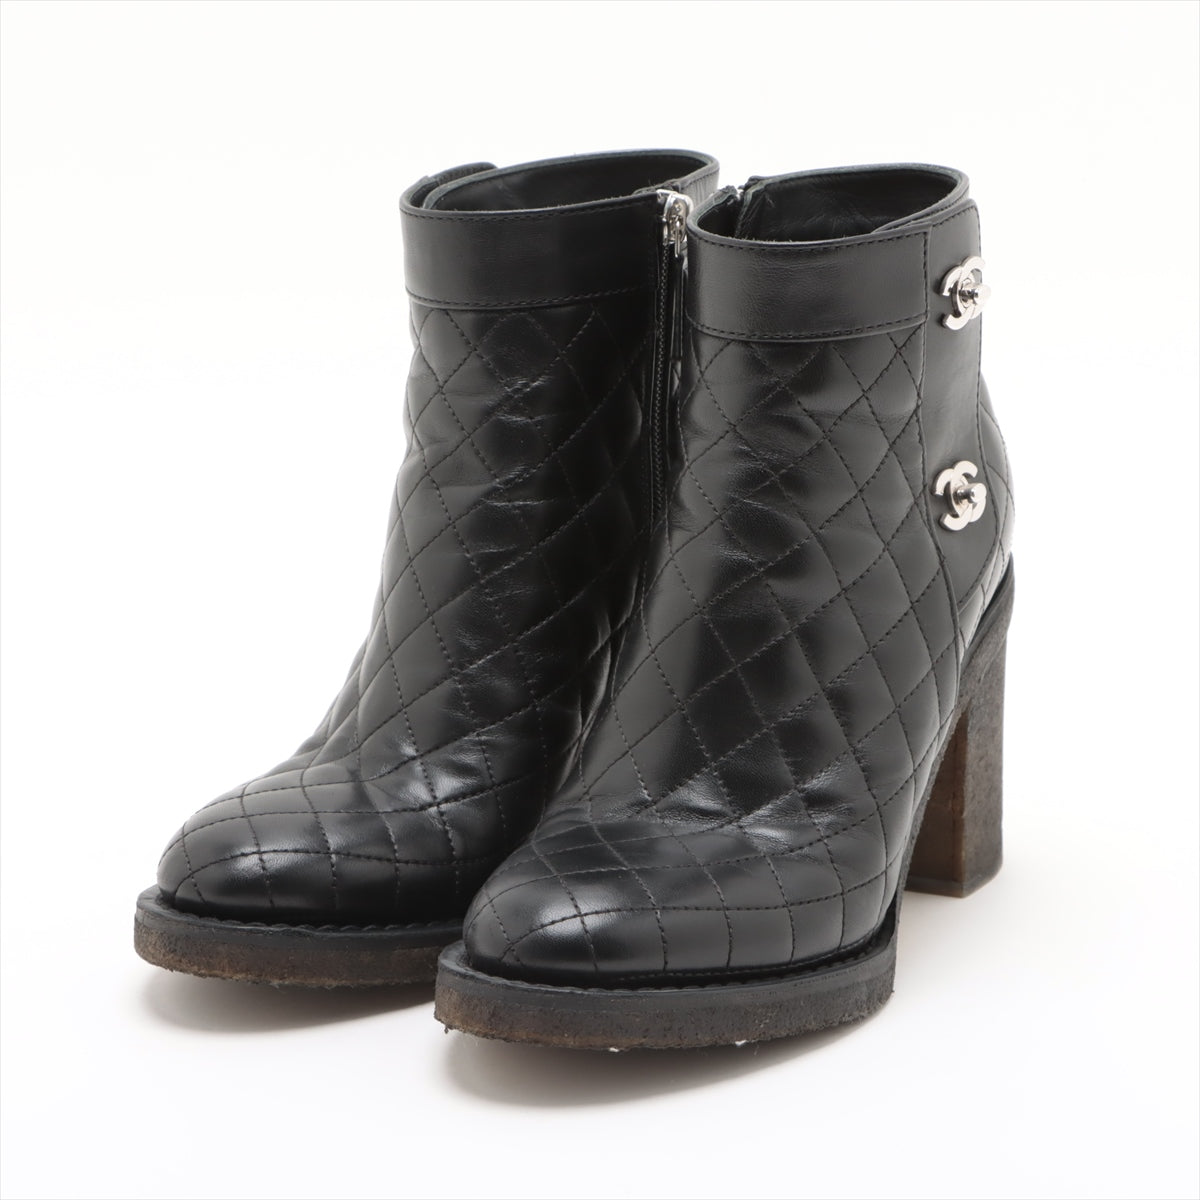 Chanel Coco Mark Matelasse Leather Short Boots 37 Ladies' Black G31285 double turn lock